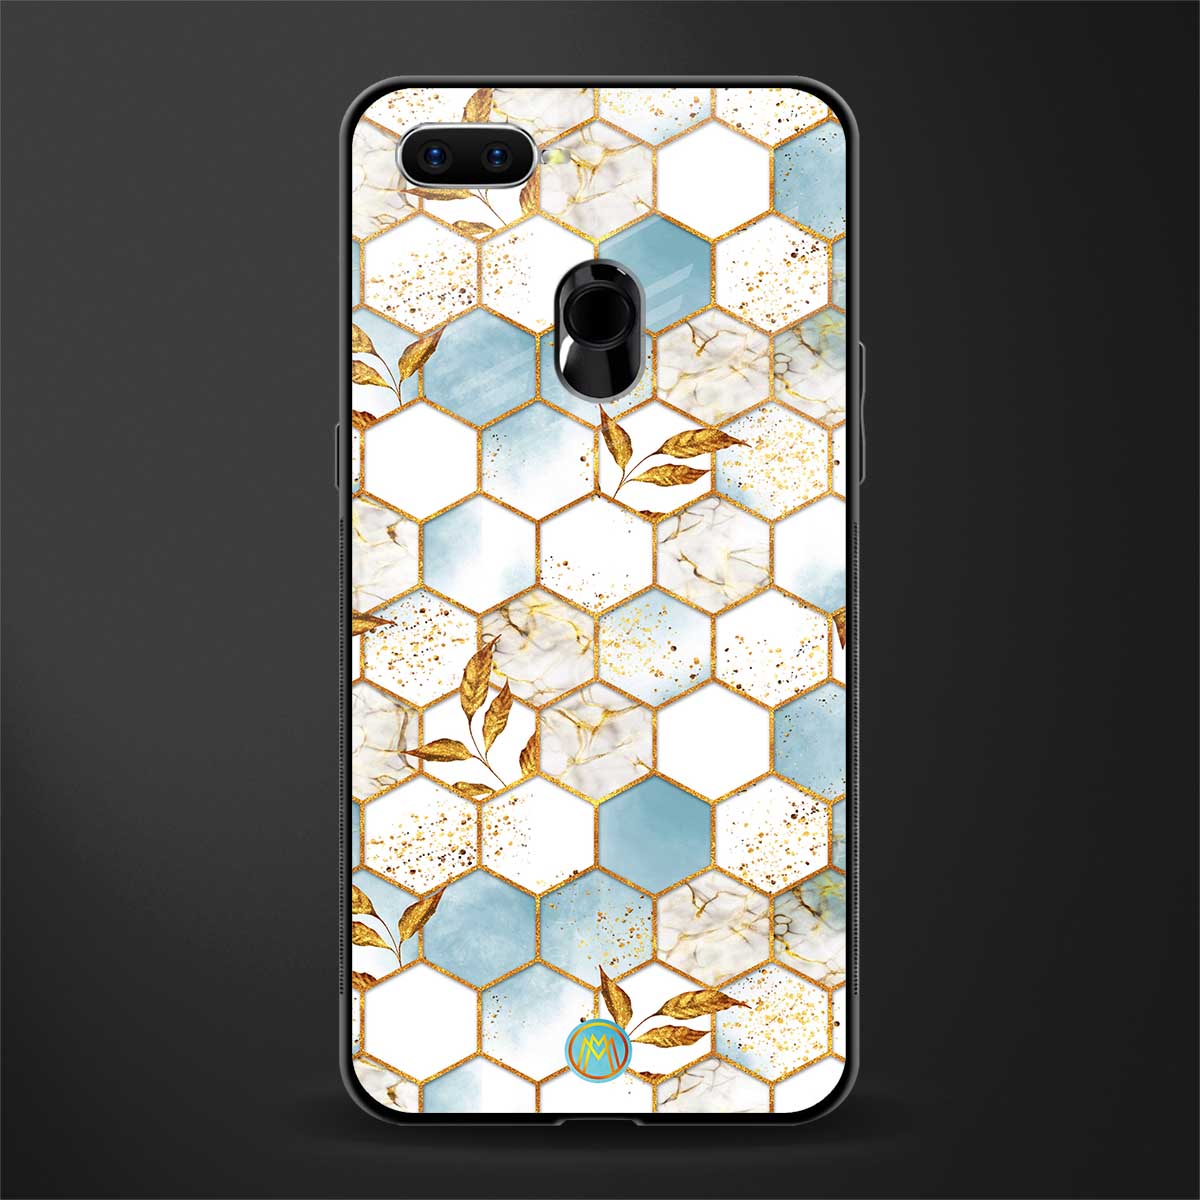 white marble tiles glass case for realme 2 pro image